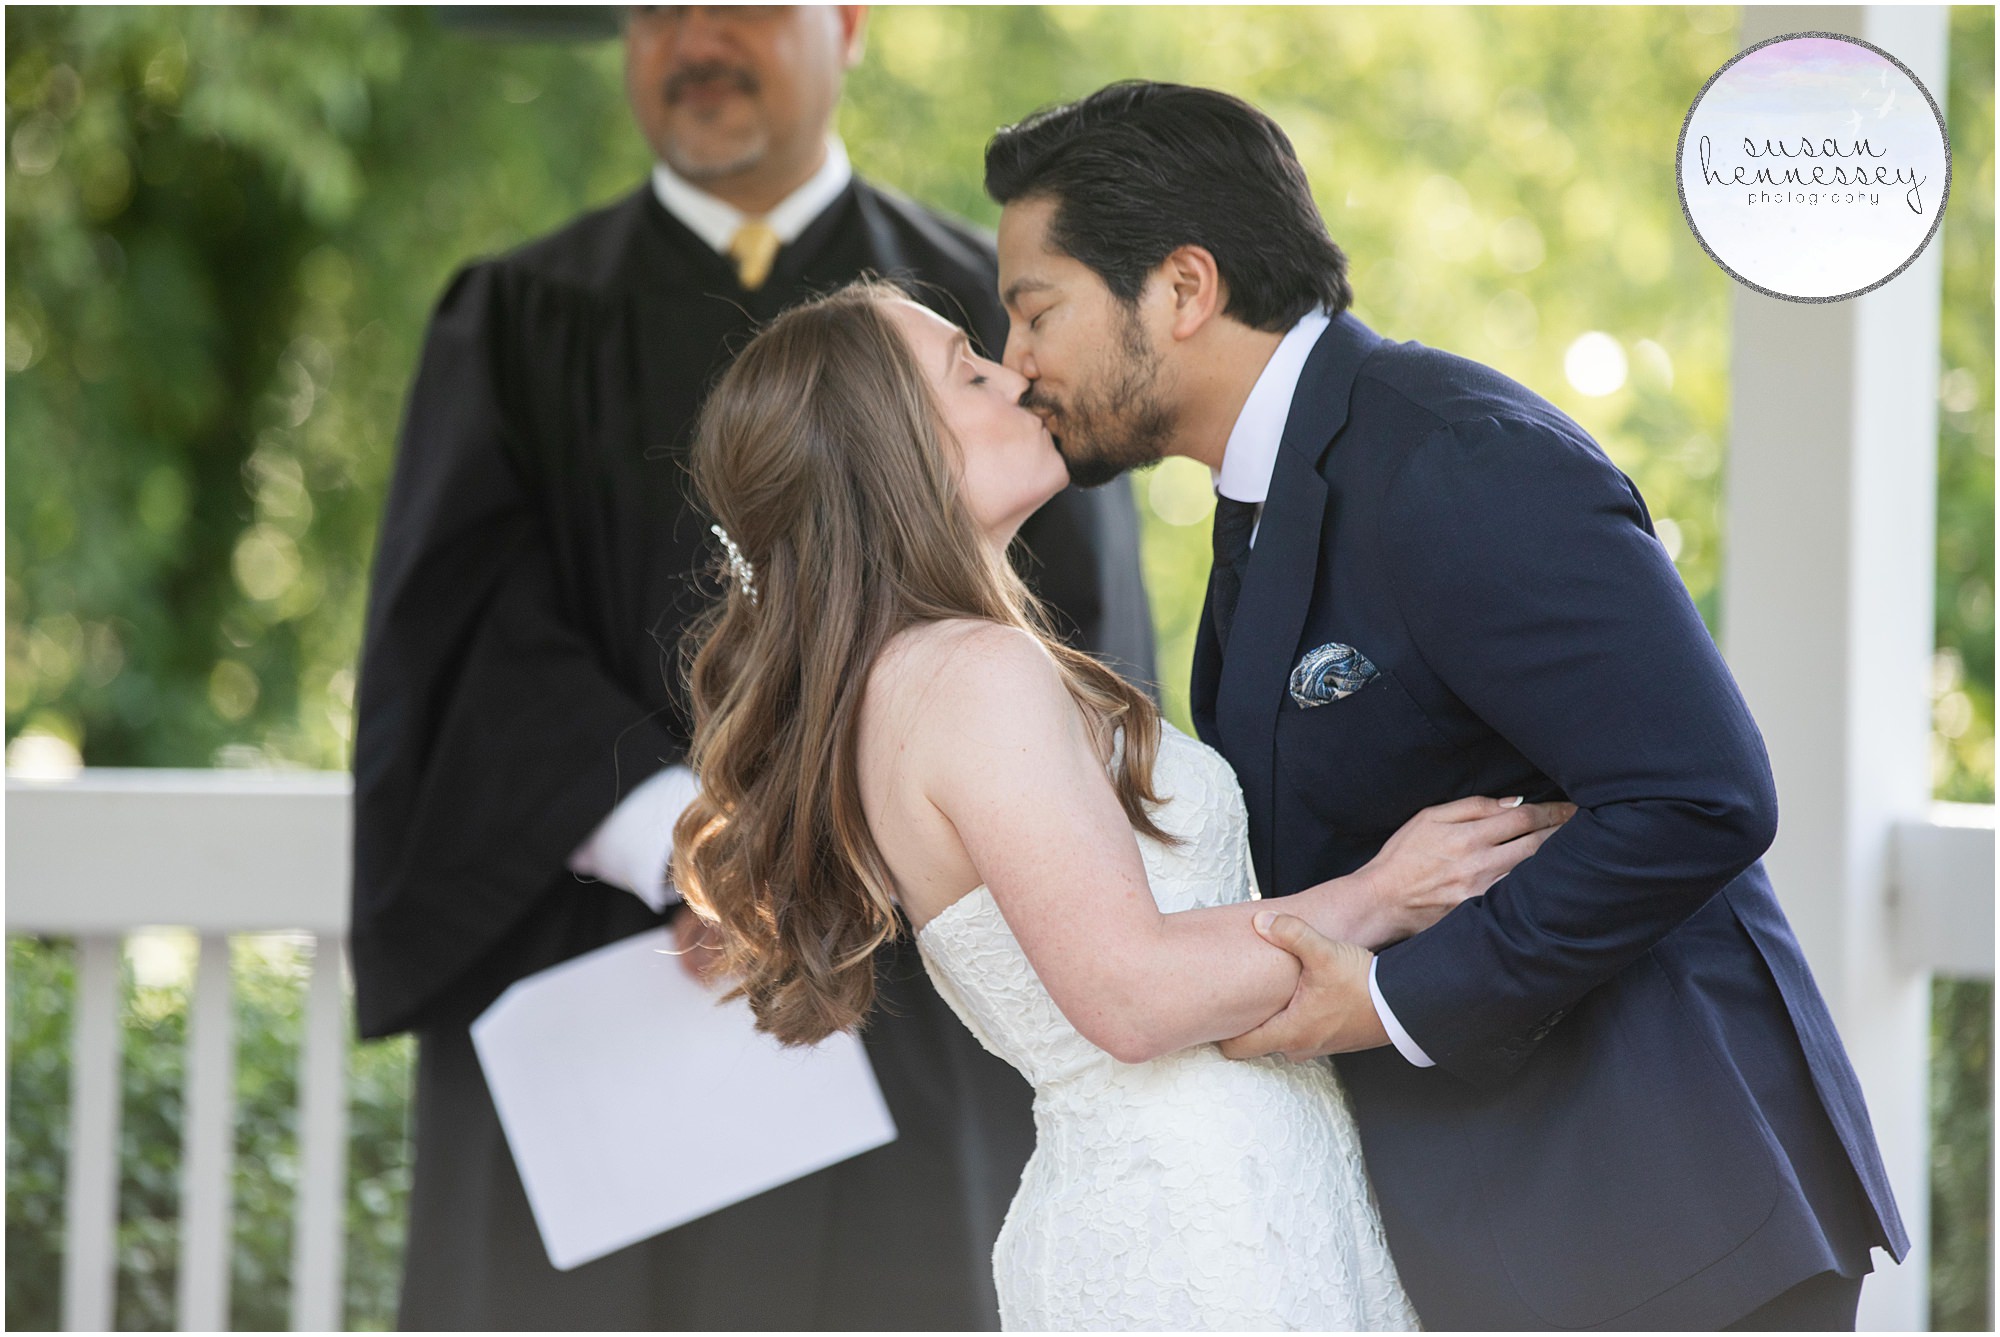 Bride and groom kiss at their intimate wedding ceremony at Sayen Gardens